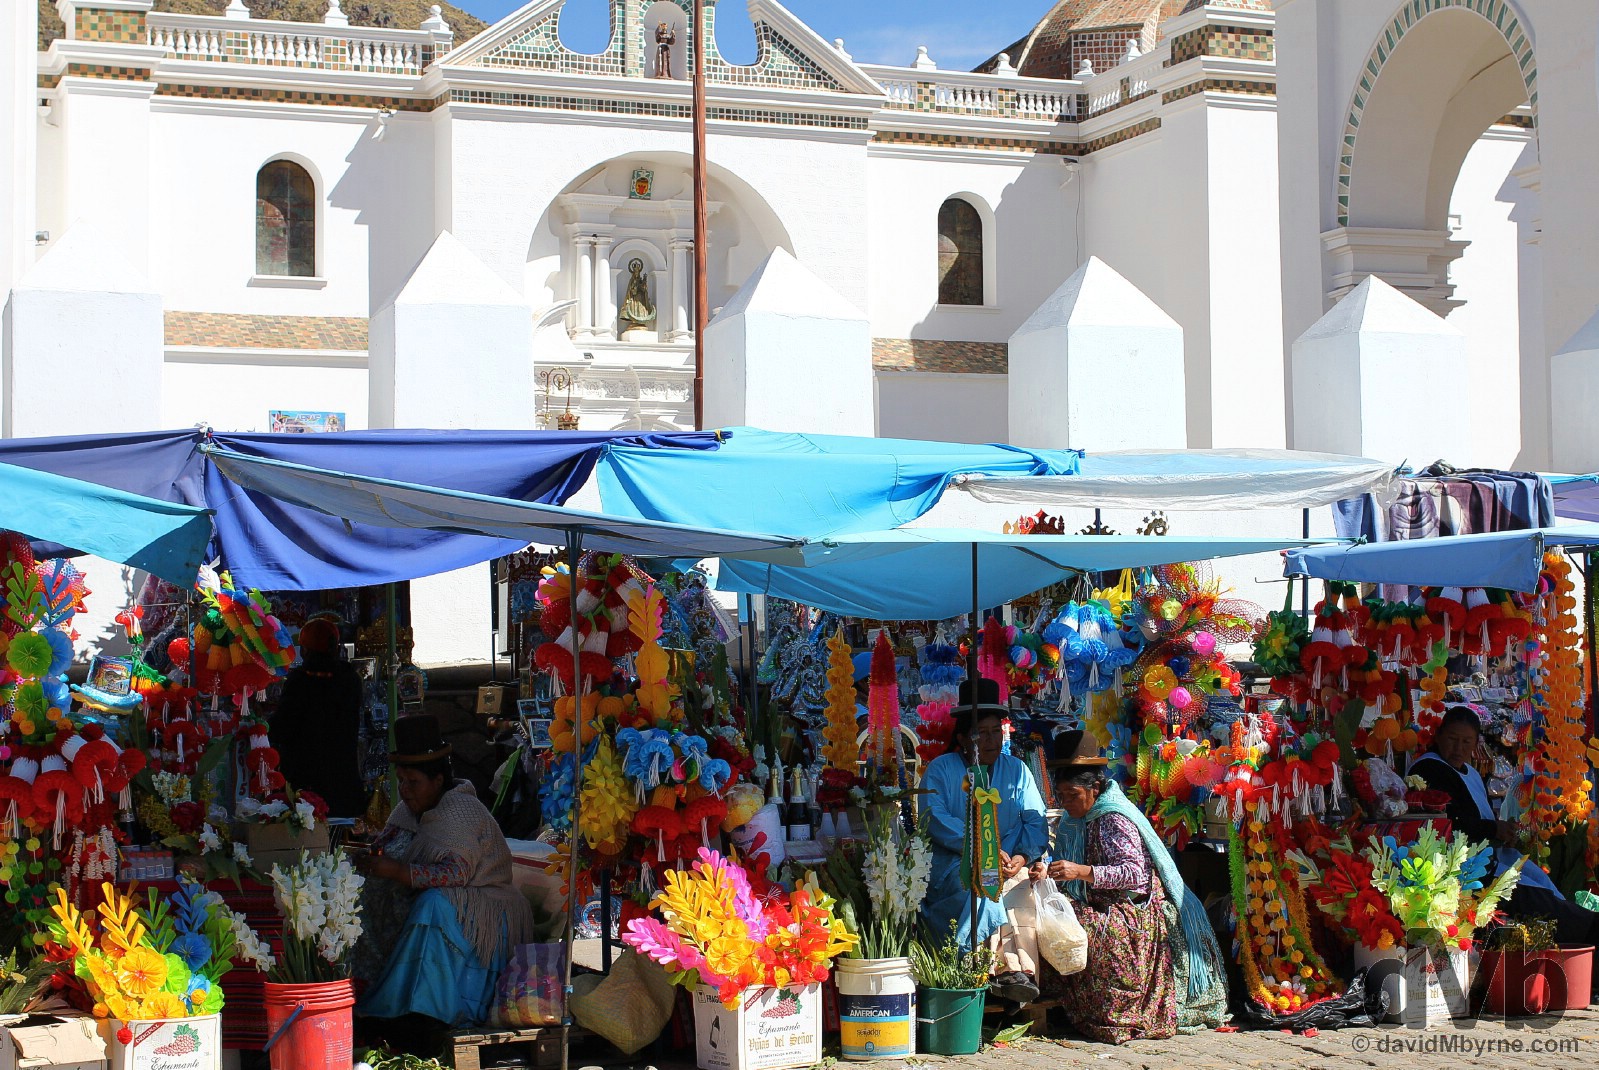 Vendors outside the Catedral in Copacabana, Bolivia. August 23, 2015. 